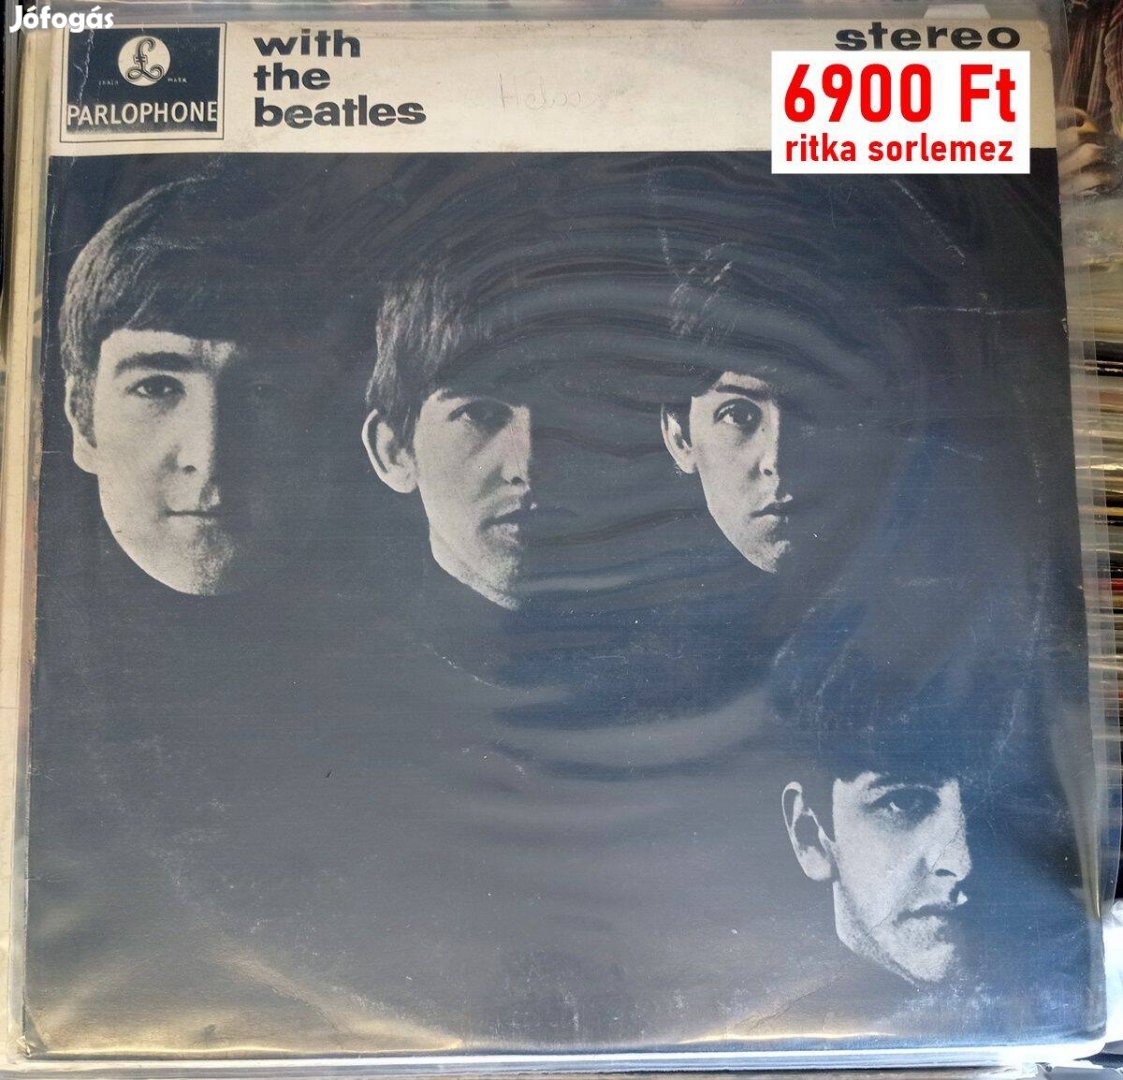 With the Beatles (LP, ritka sorlemez)